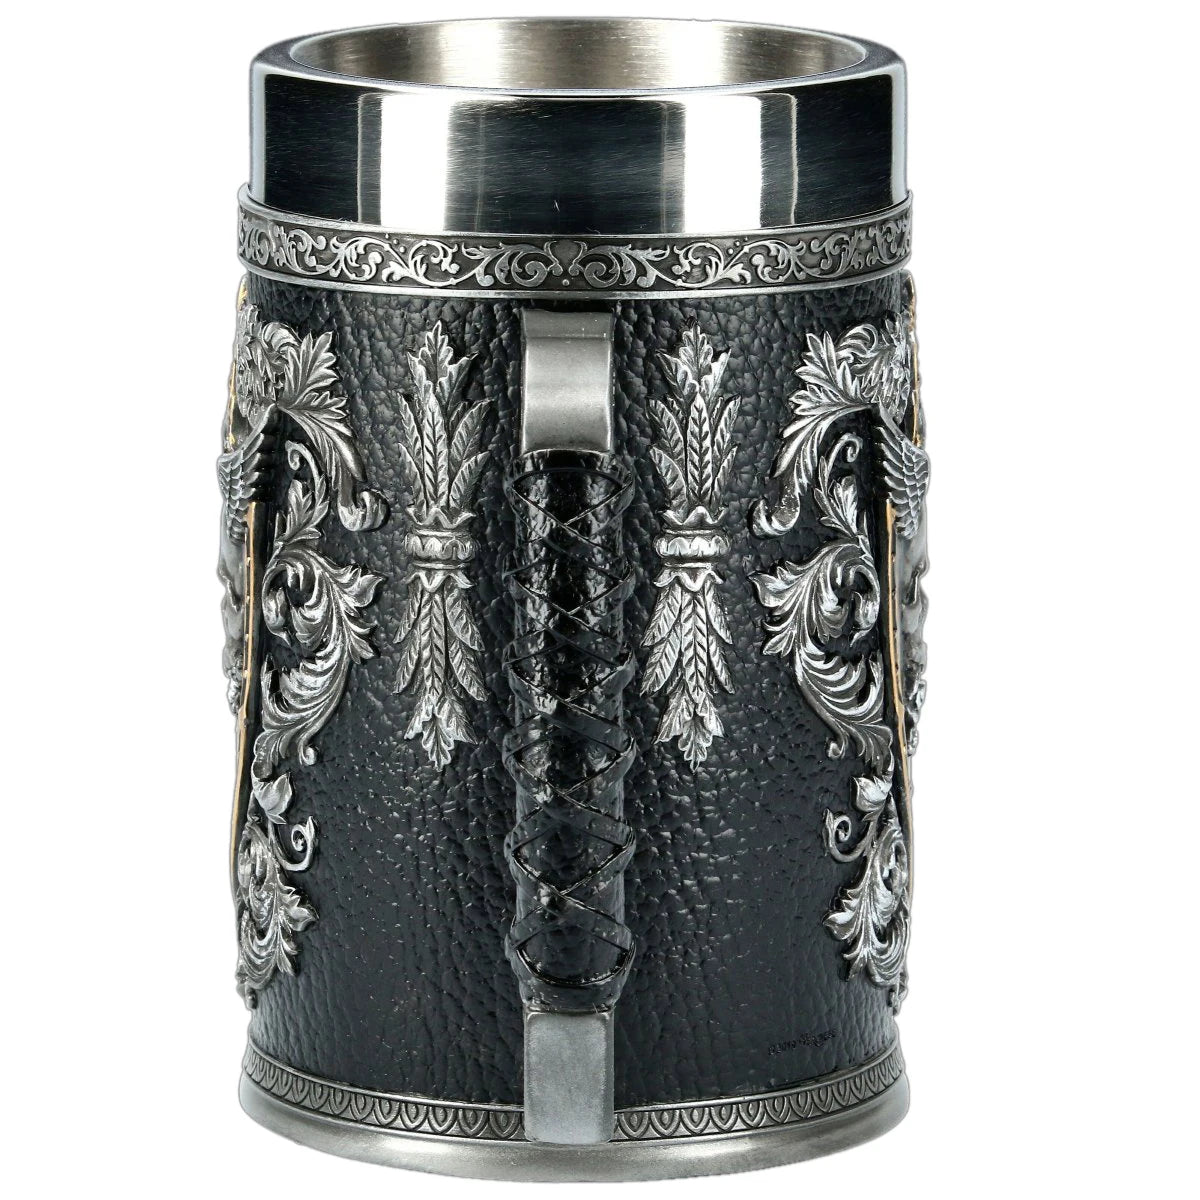 Paladin's Retribution Stainless Steel and Resin Tankard